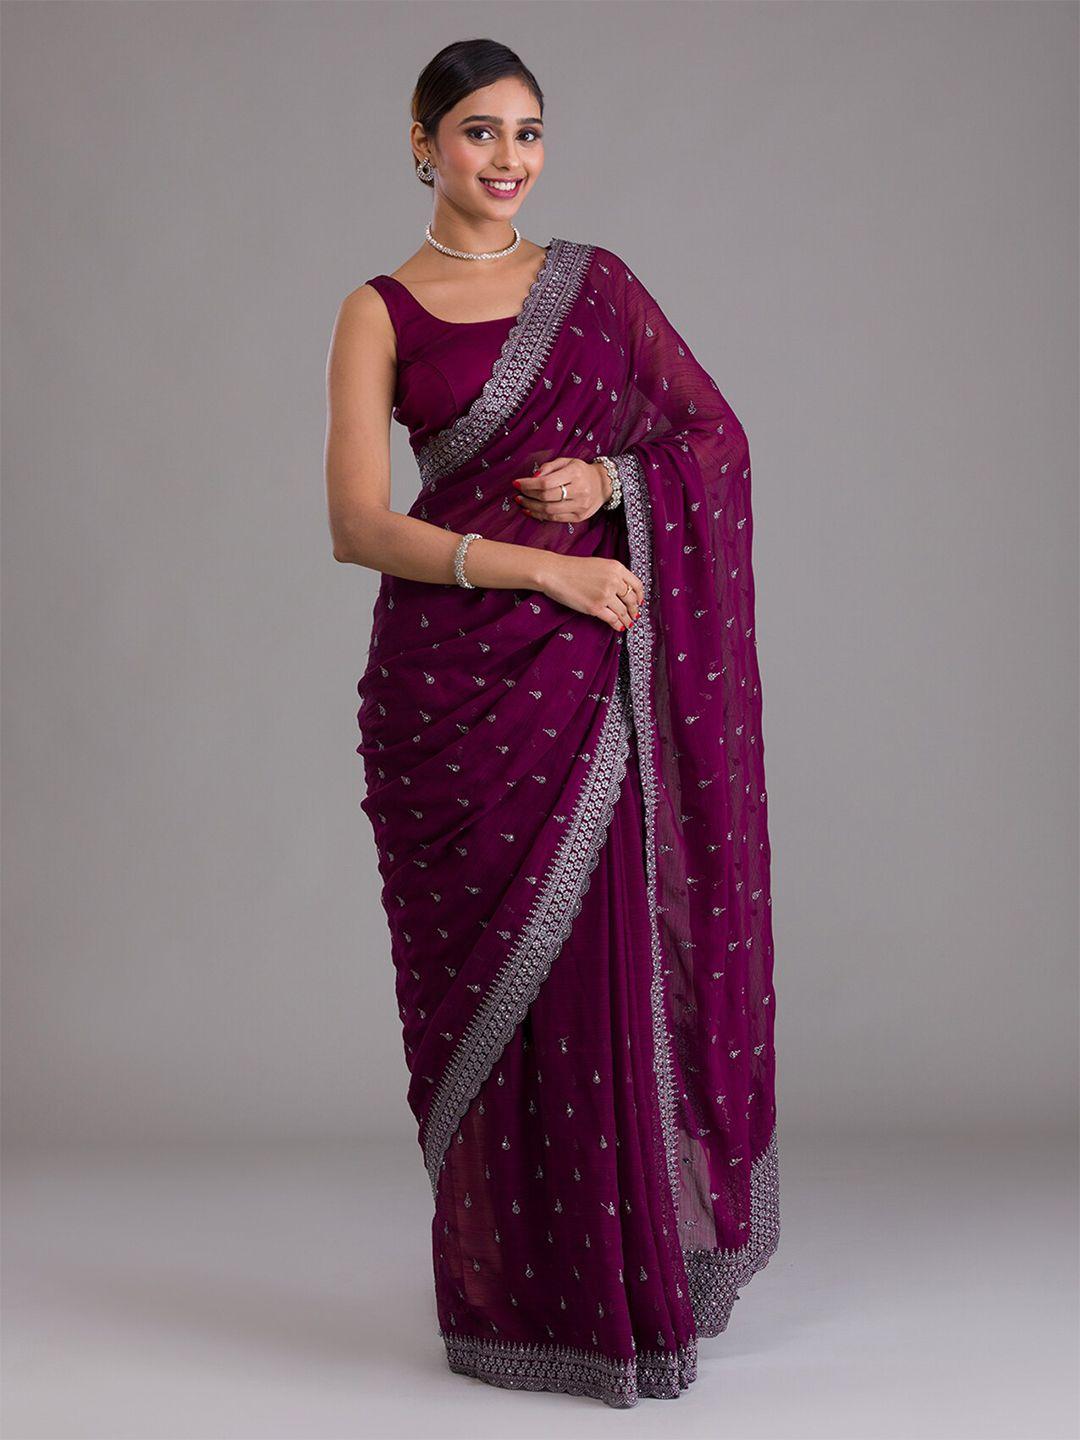 koskii maroon & silver-toned floral embroidered heavy work saree